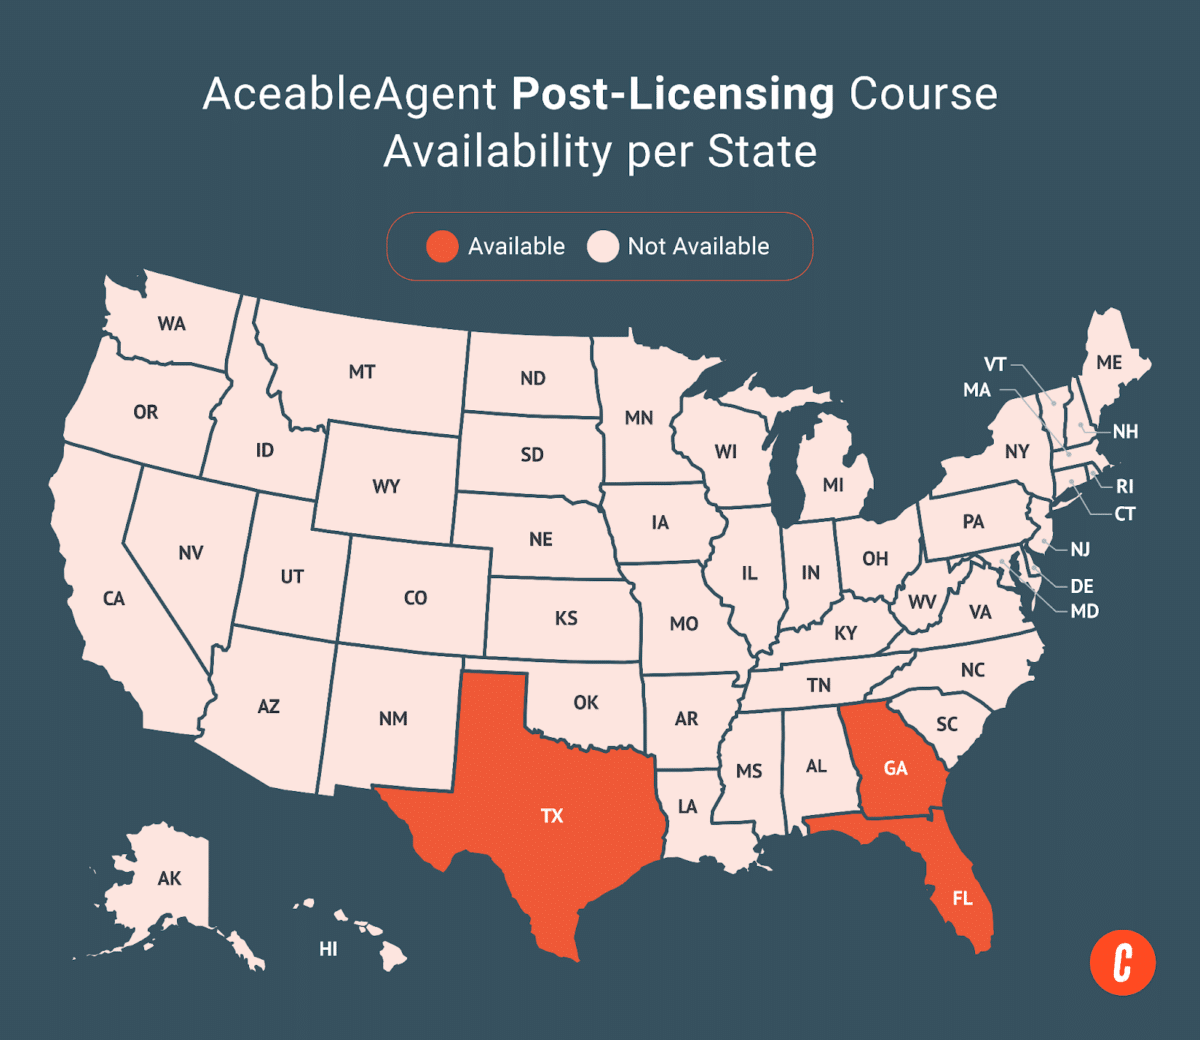 A U.S. map with states where AceableAgent's available post-licensing courses are shaded